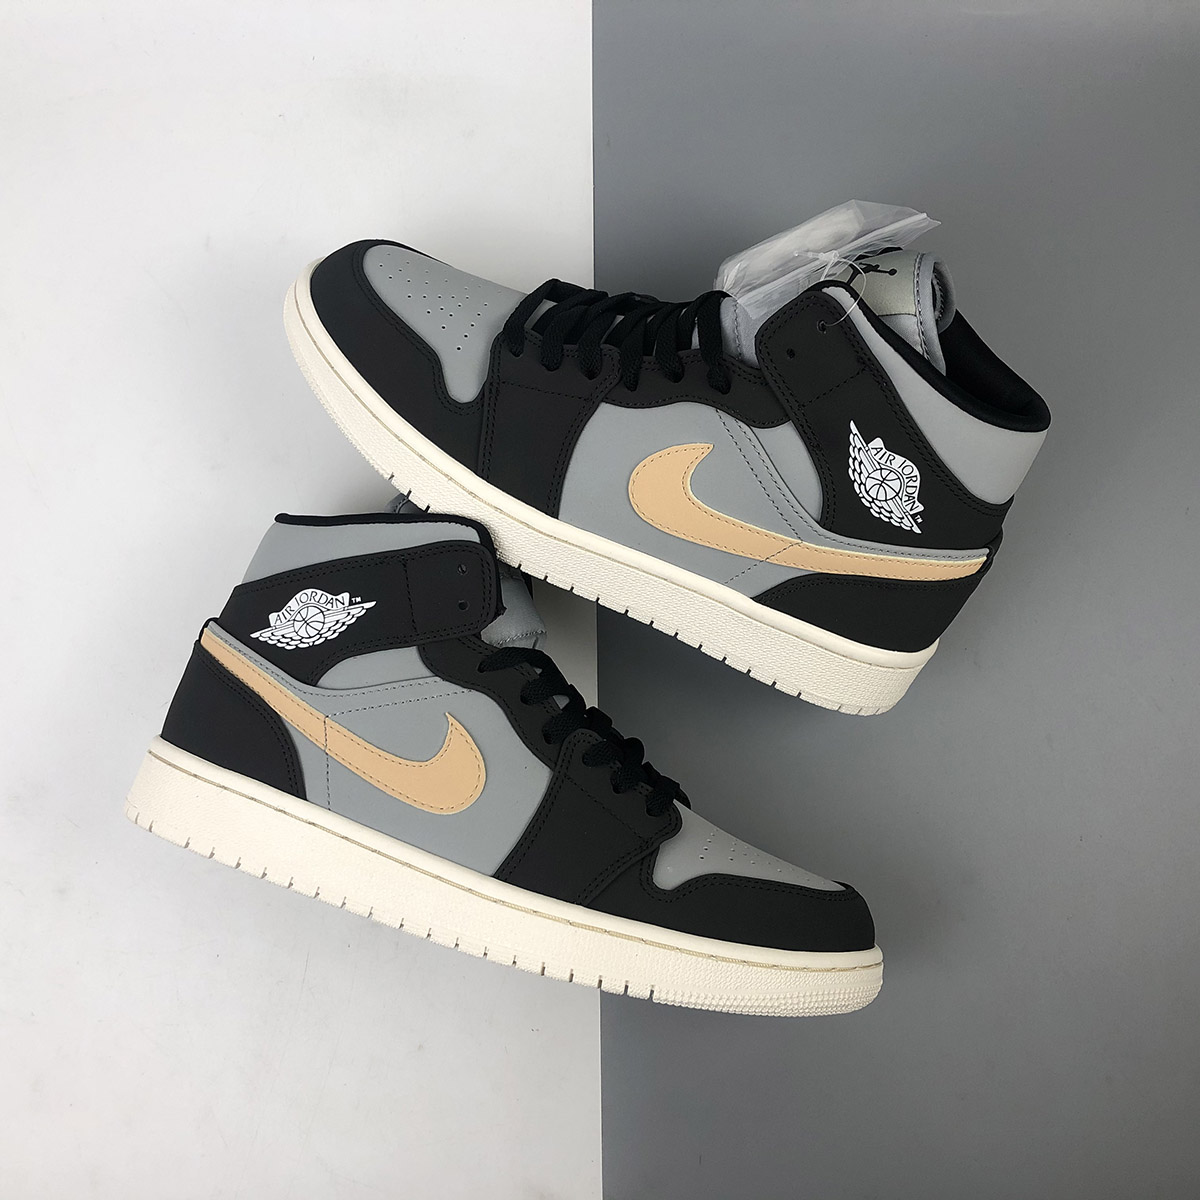 Air Jordan 1 Mid ‘Iron Grey Onyx’ For Sale – The Sole Line